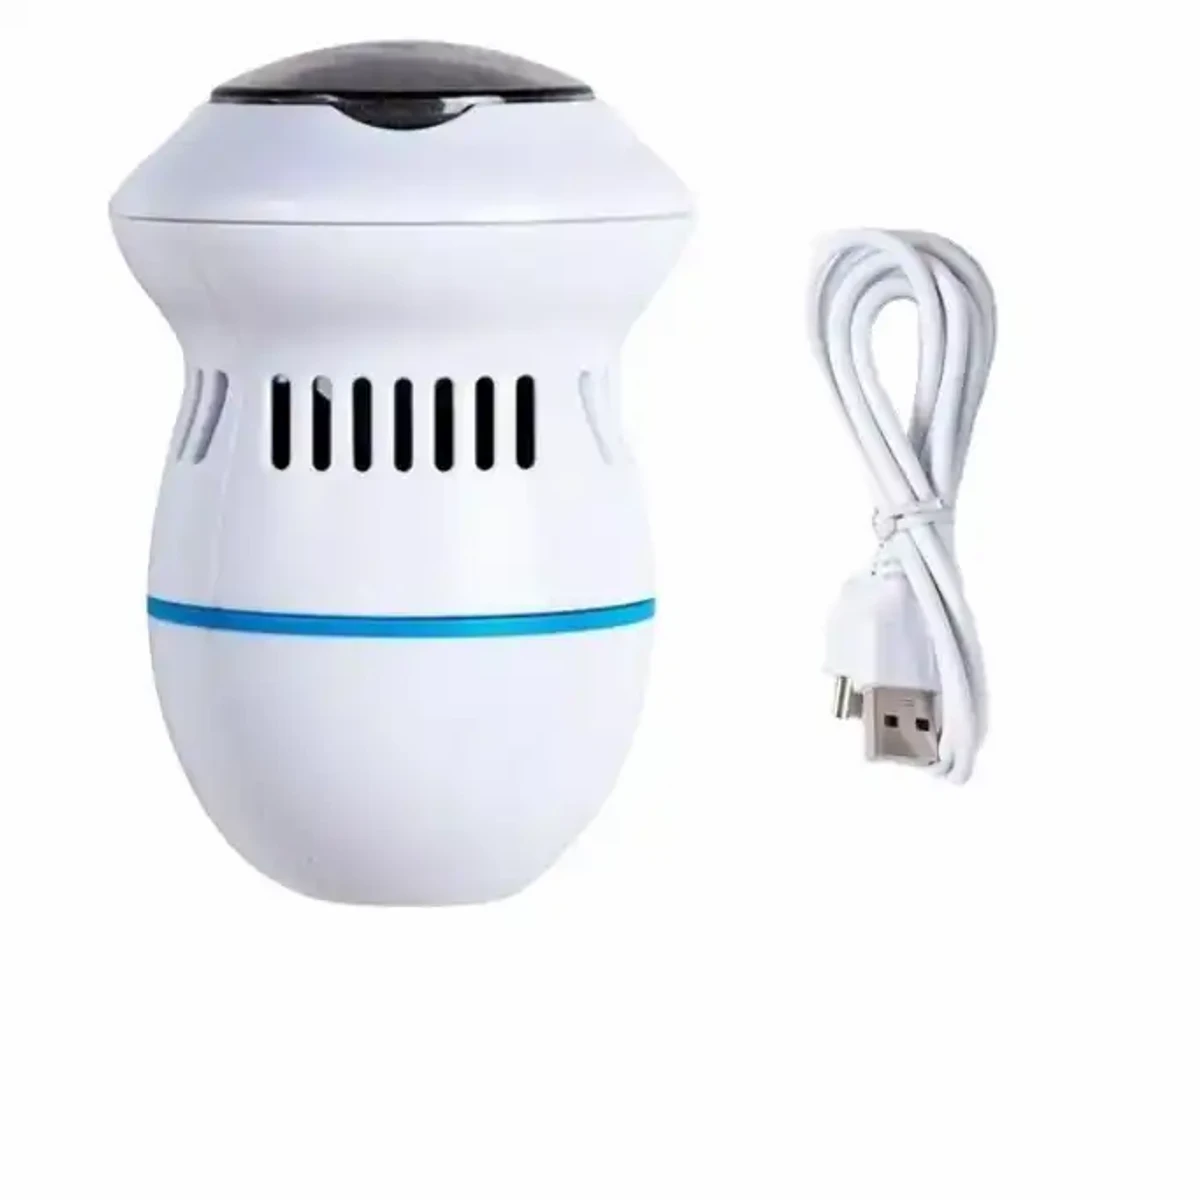 New Professional Foot Care Pedicure, Foot Grinder Usb Charging